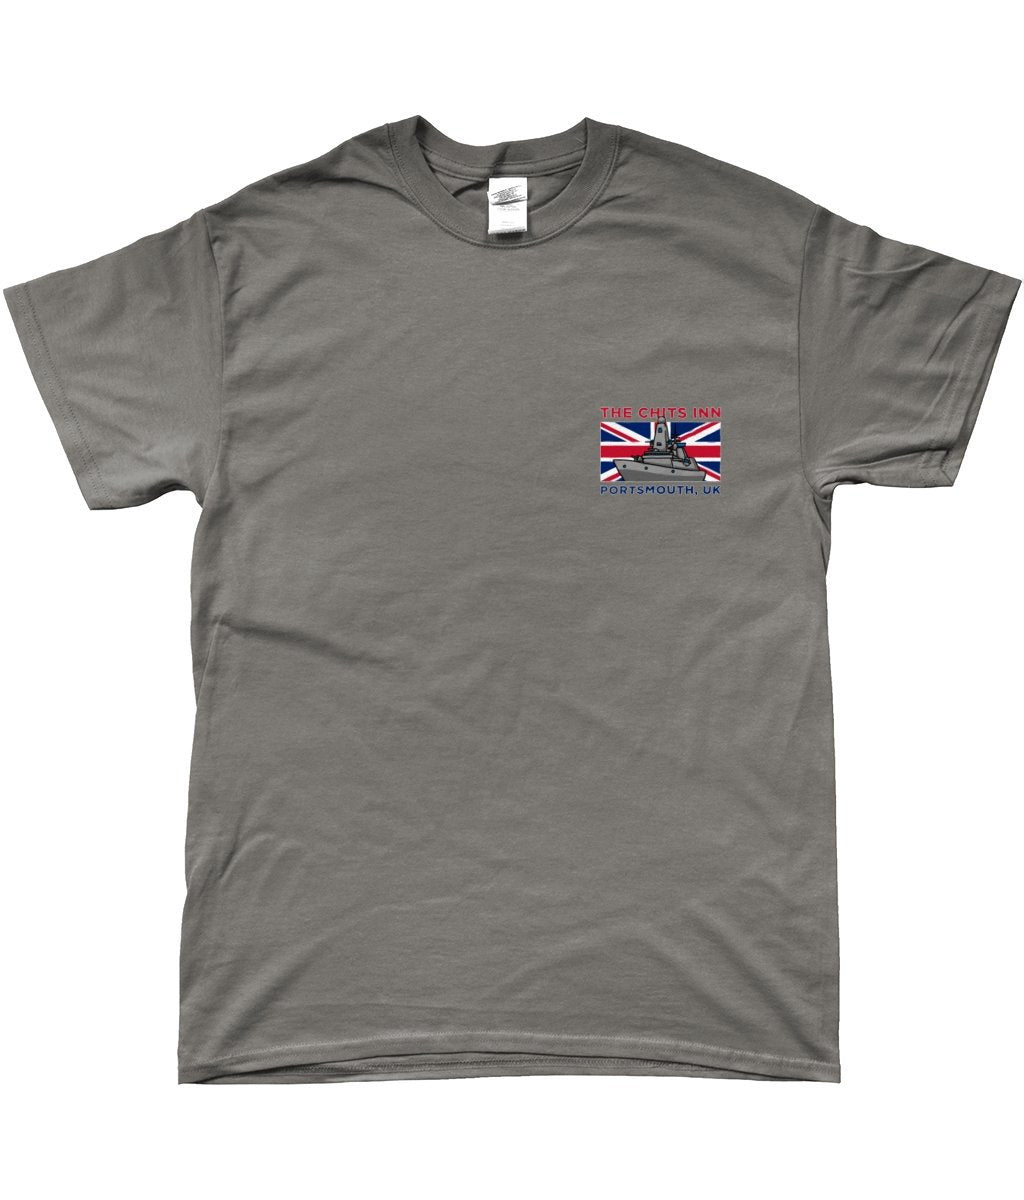 Type 45 Appreciation Tee - The Chits Inn